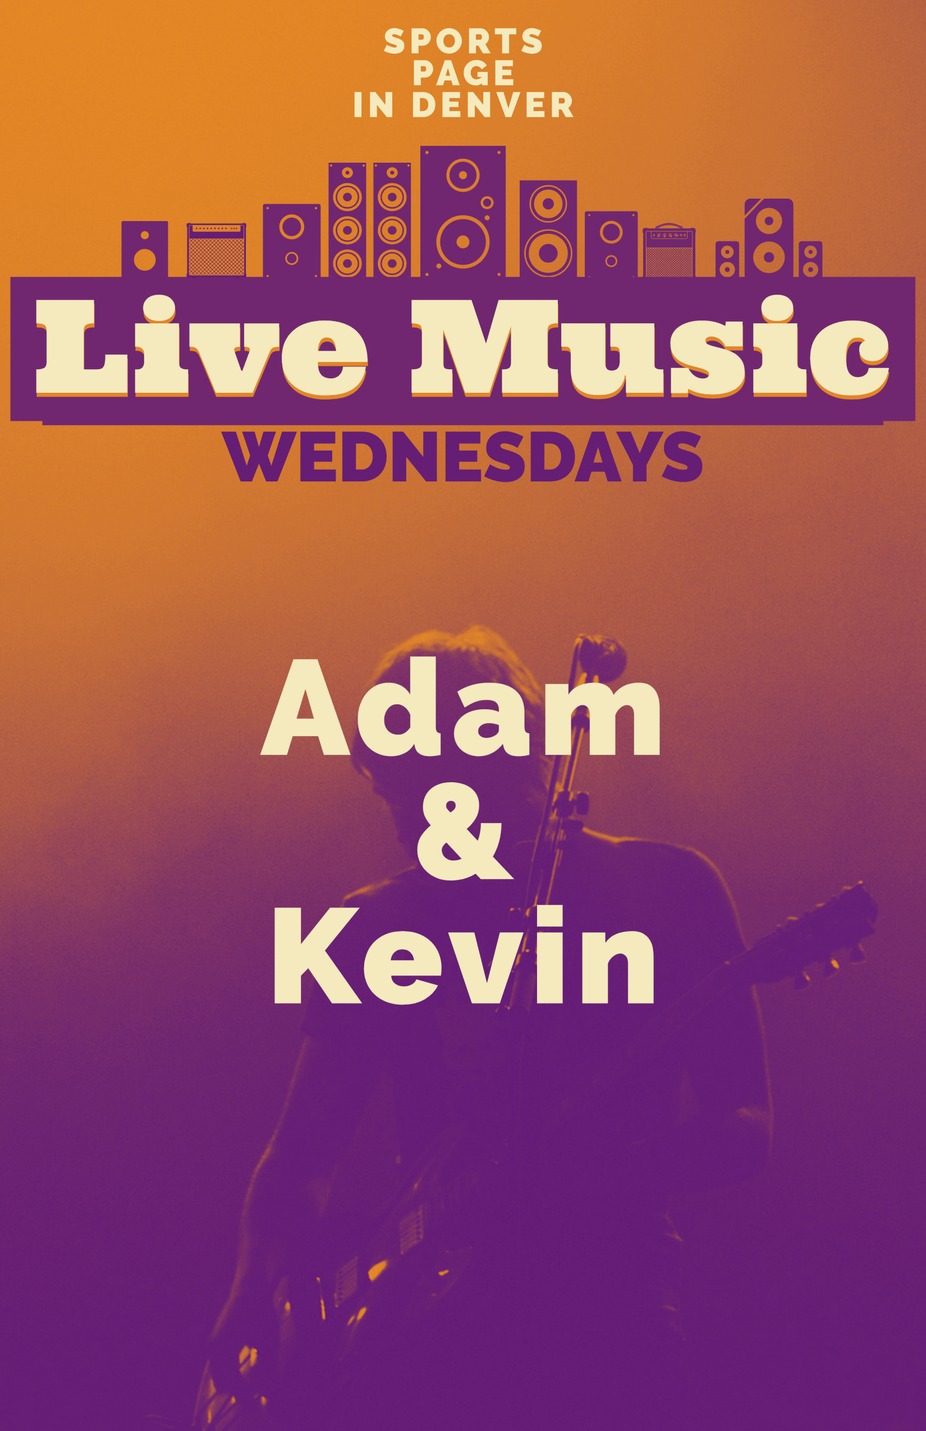 Live Music December 14th with Adam and Kevin event photo